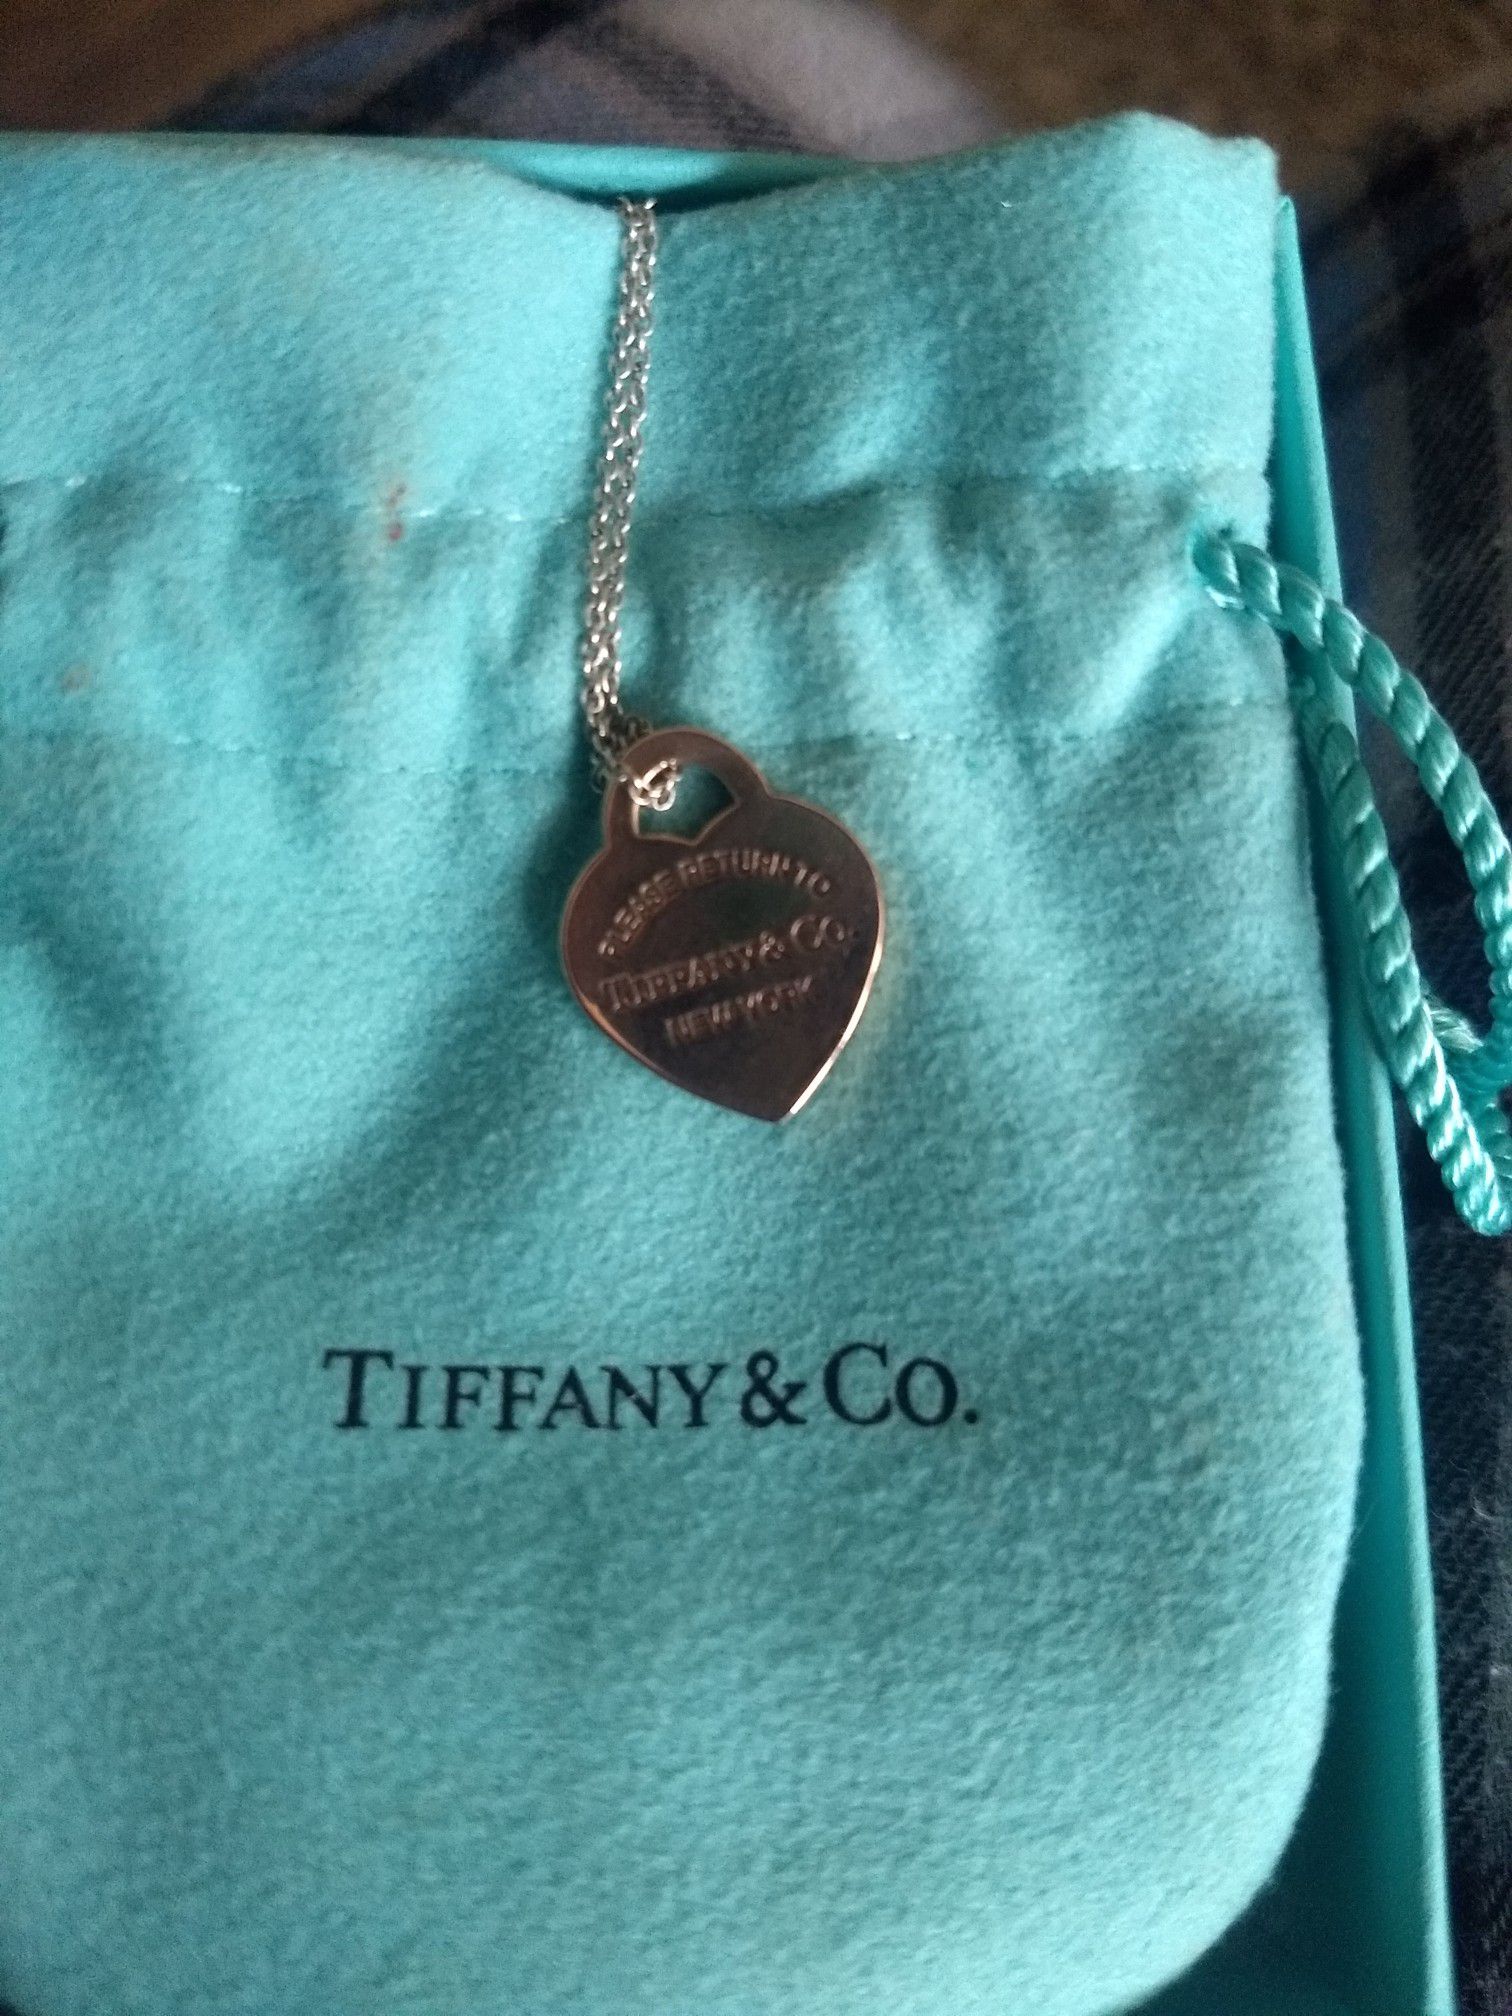 Tiffany's Rose Gold Pendant with Silver Chain